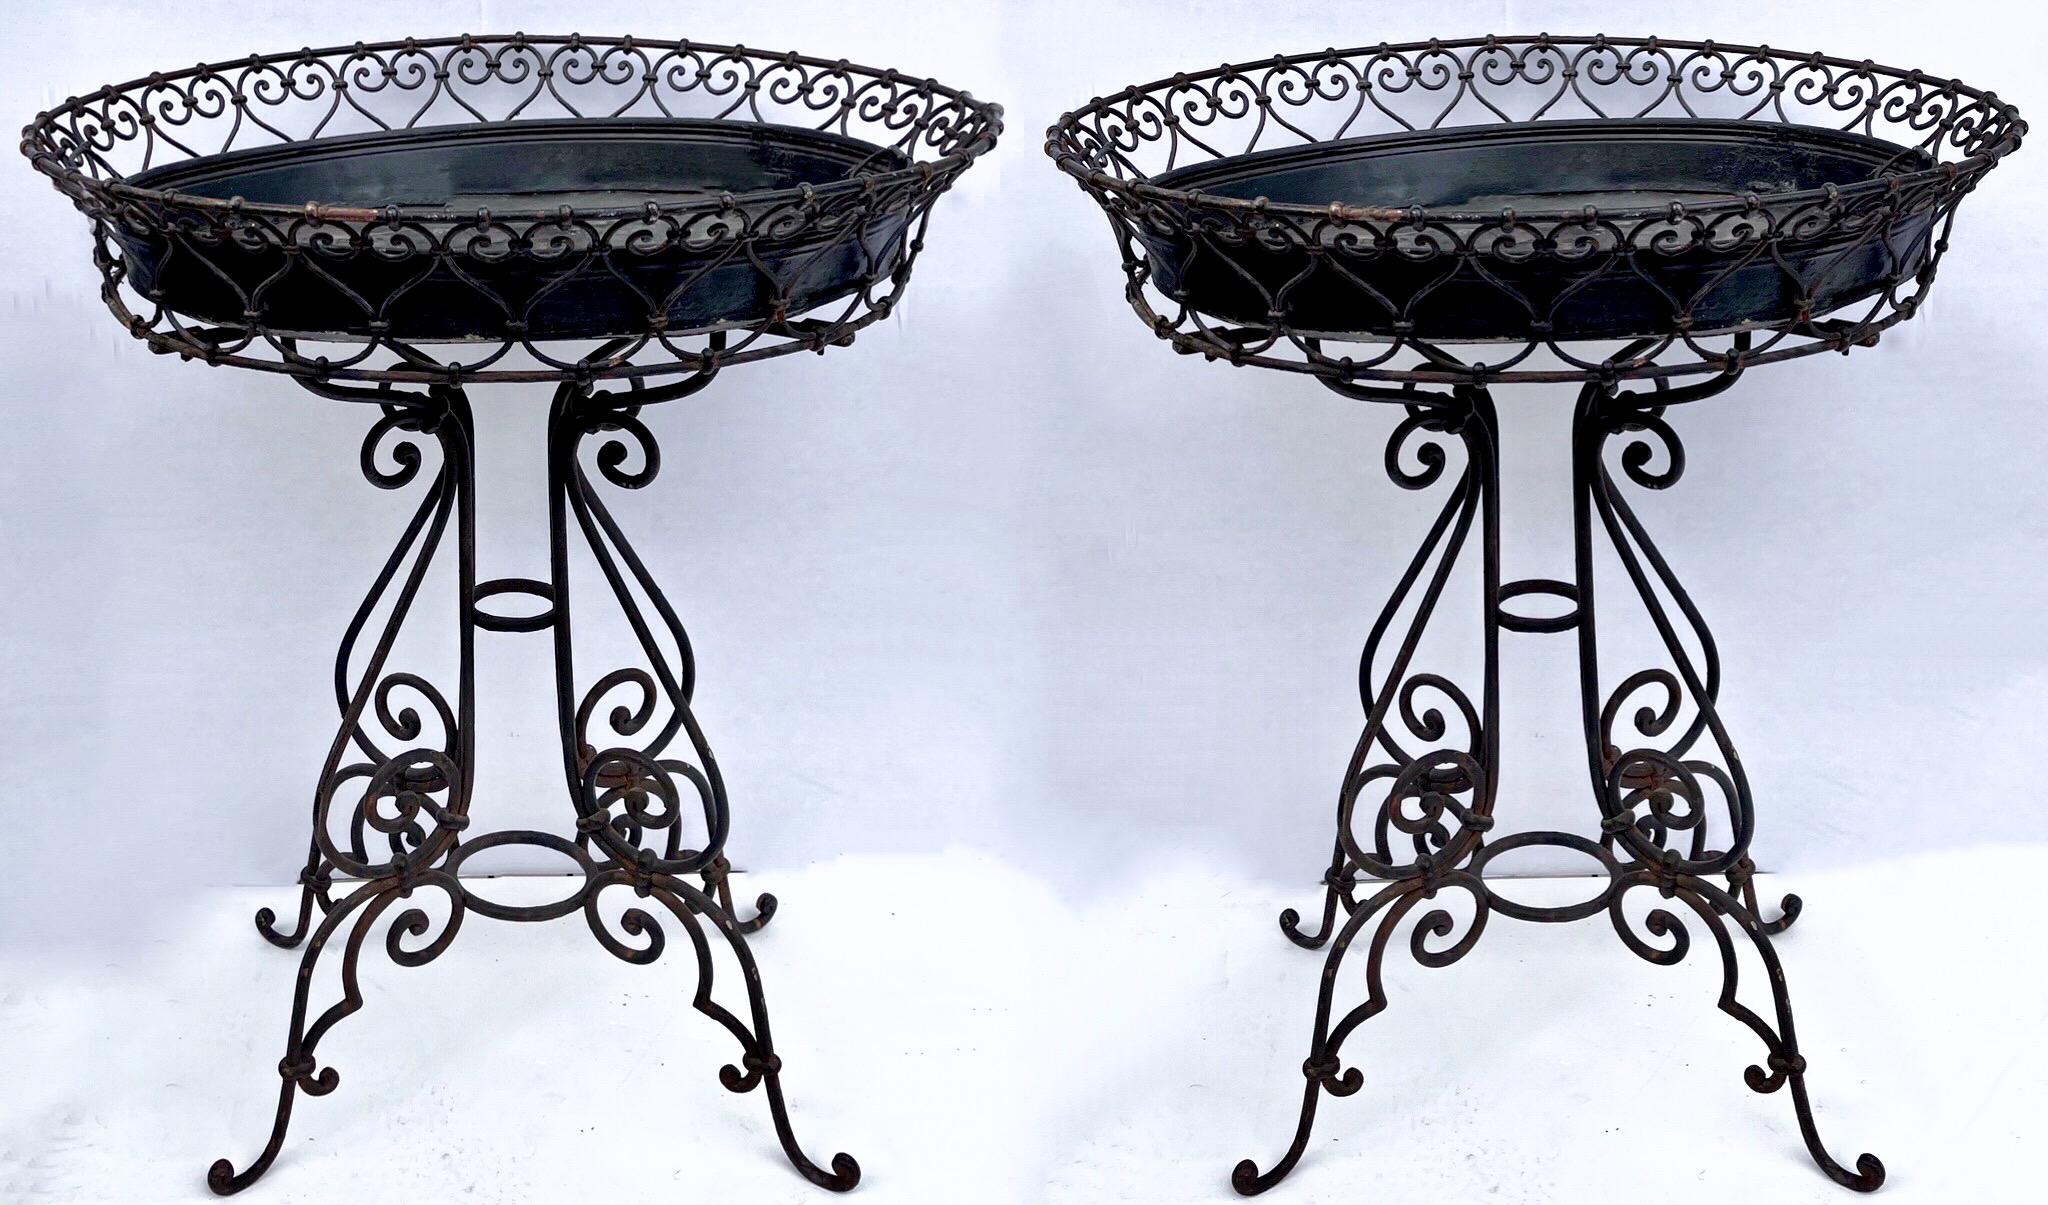 American Early 20th-C Black Scrolled Metal Jardinieres Planters or Plant Stand, Pair